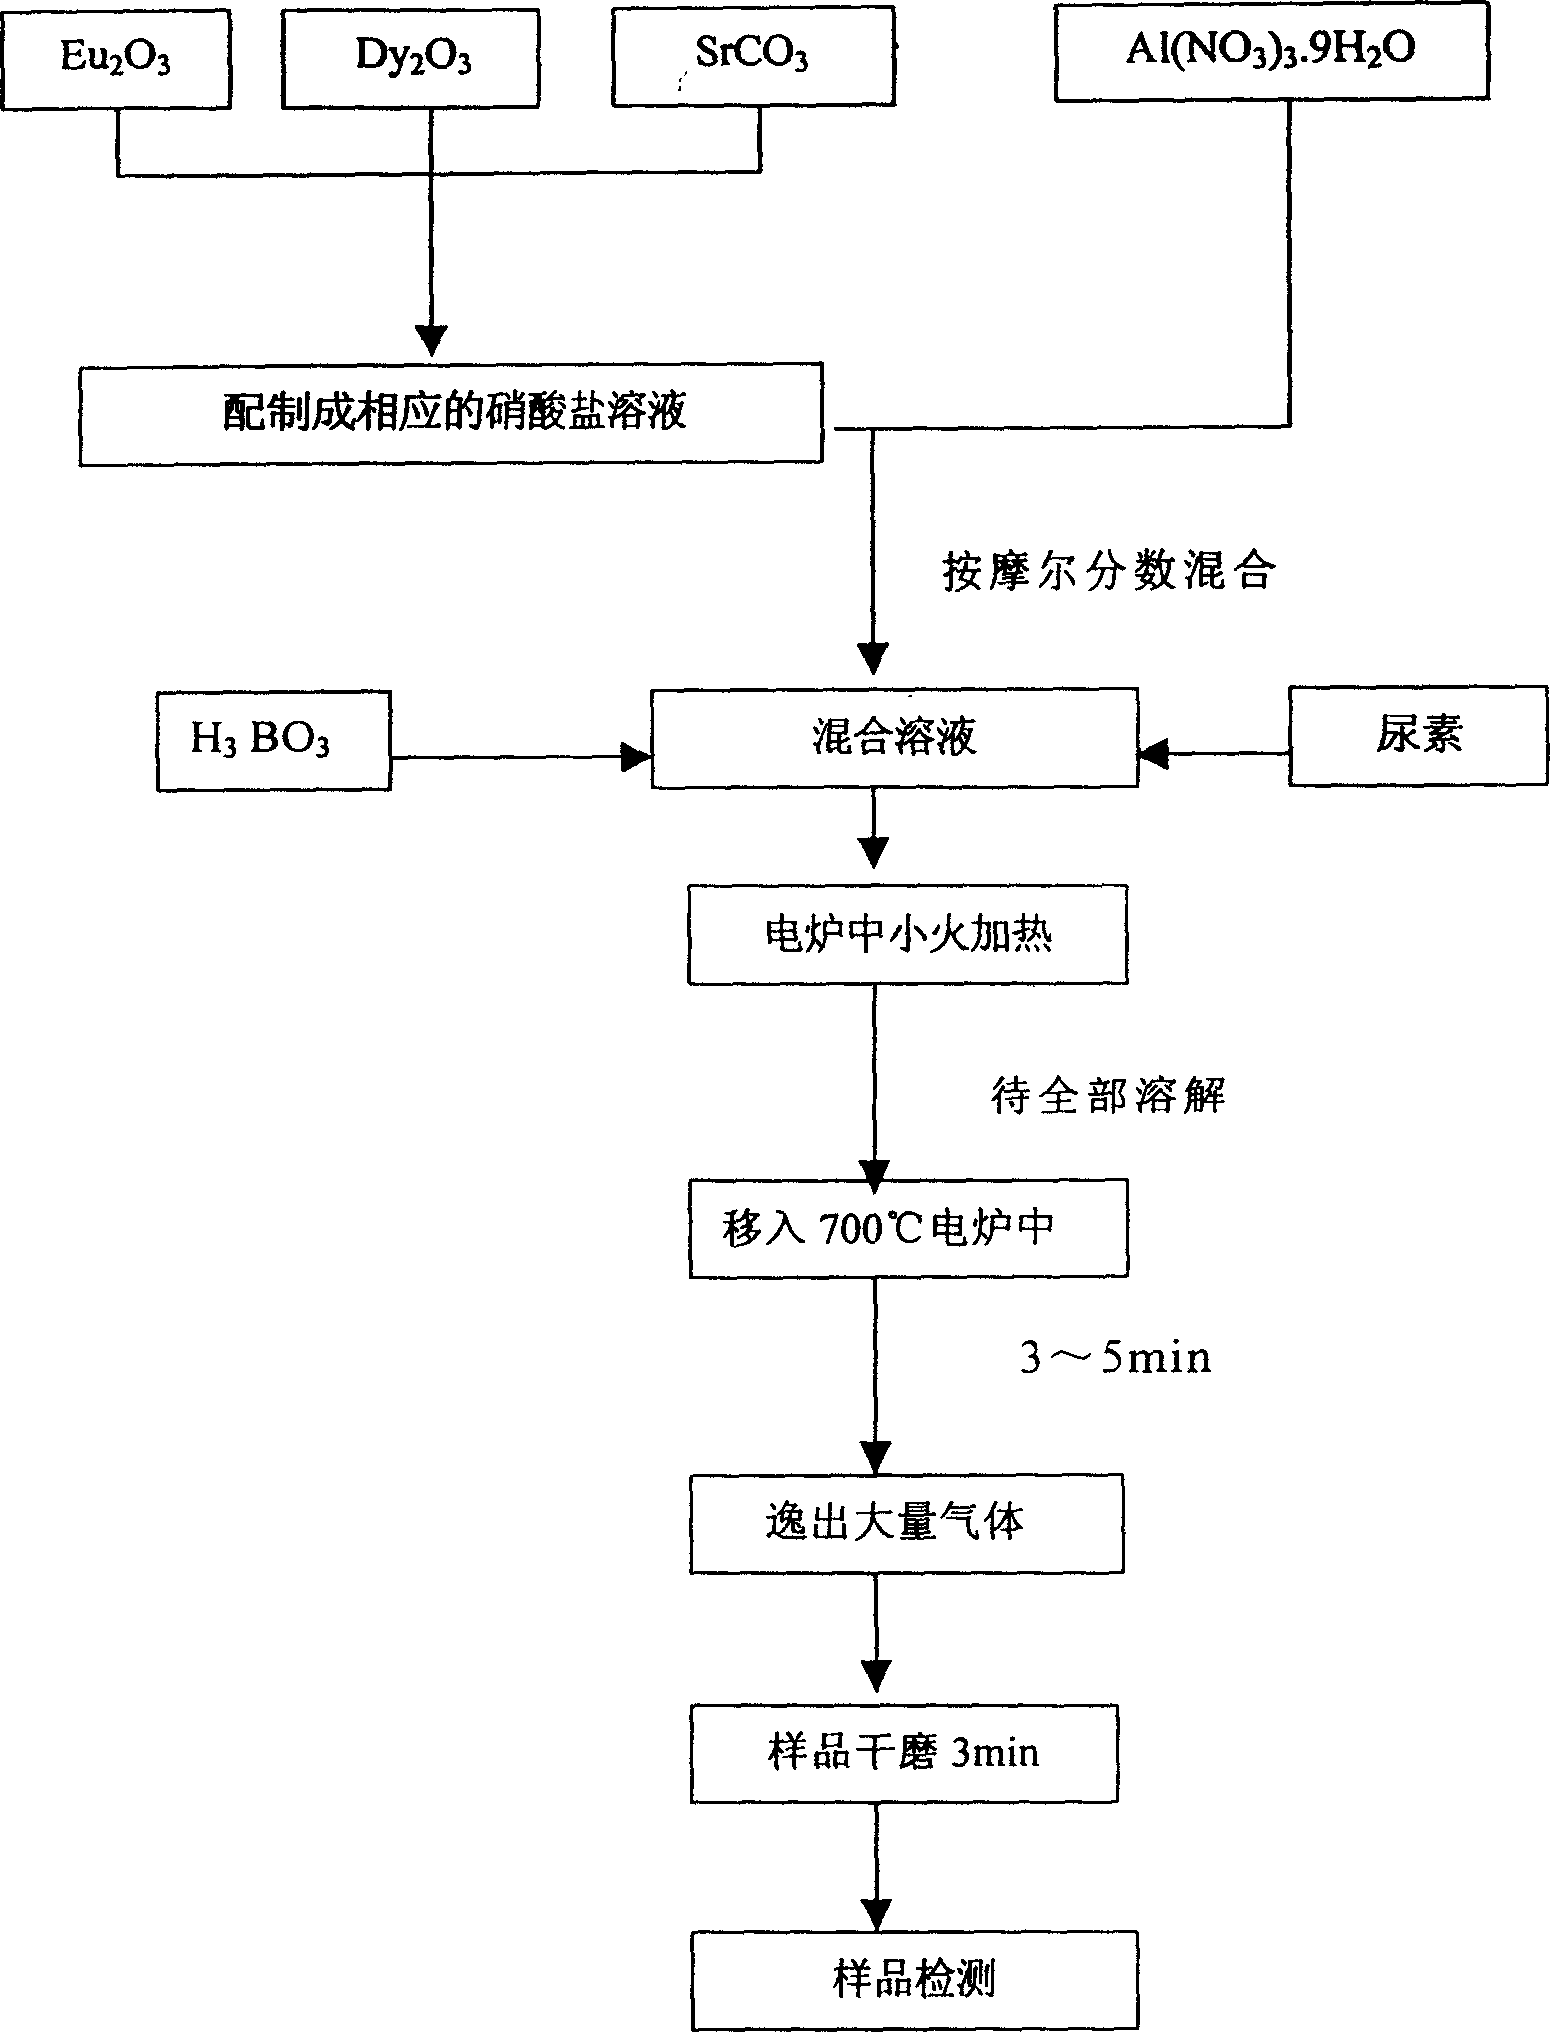 Process for preparing strontium aluminate series luminescence material by self-spreading synthesis method